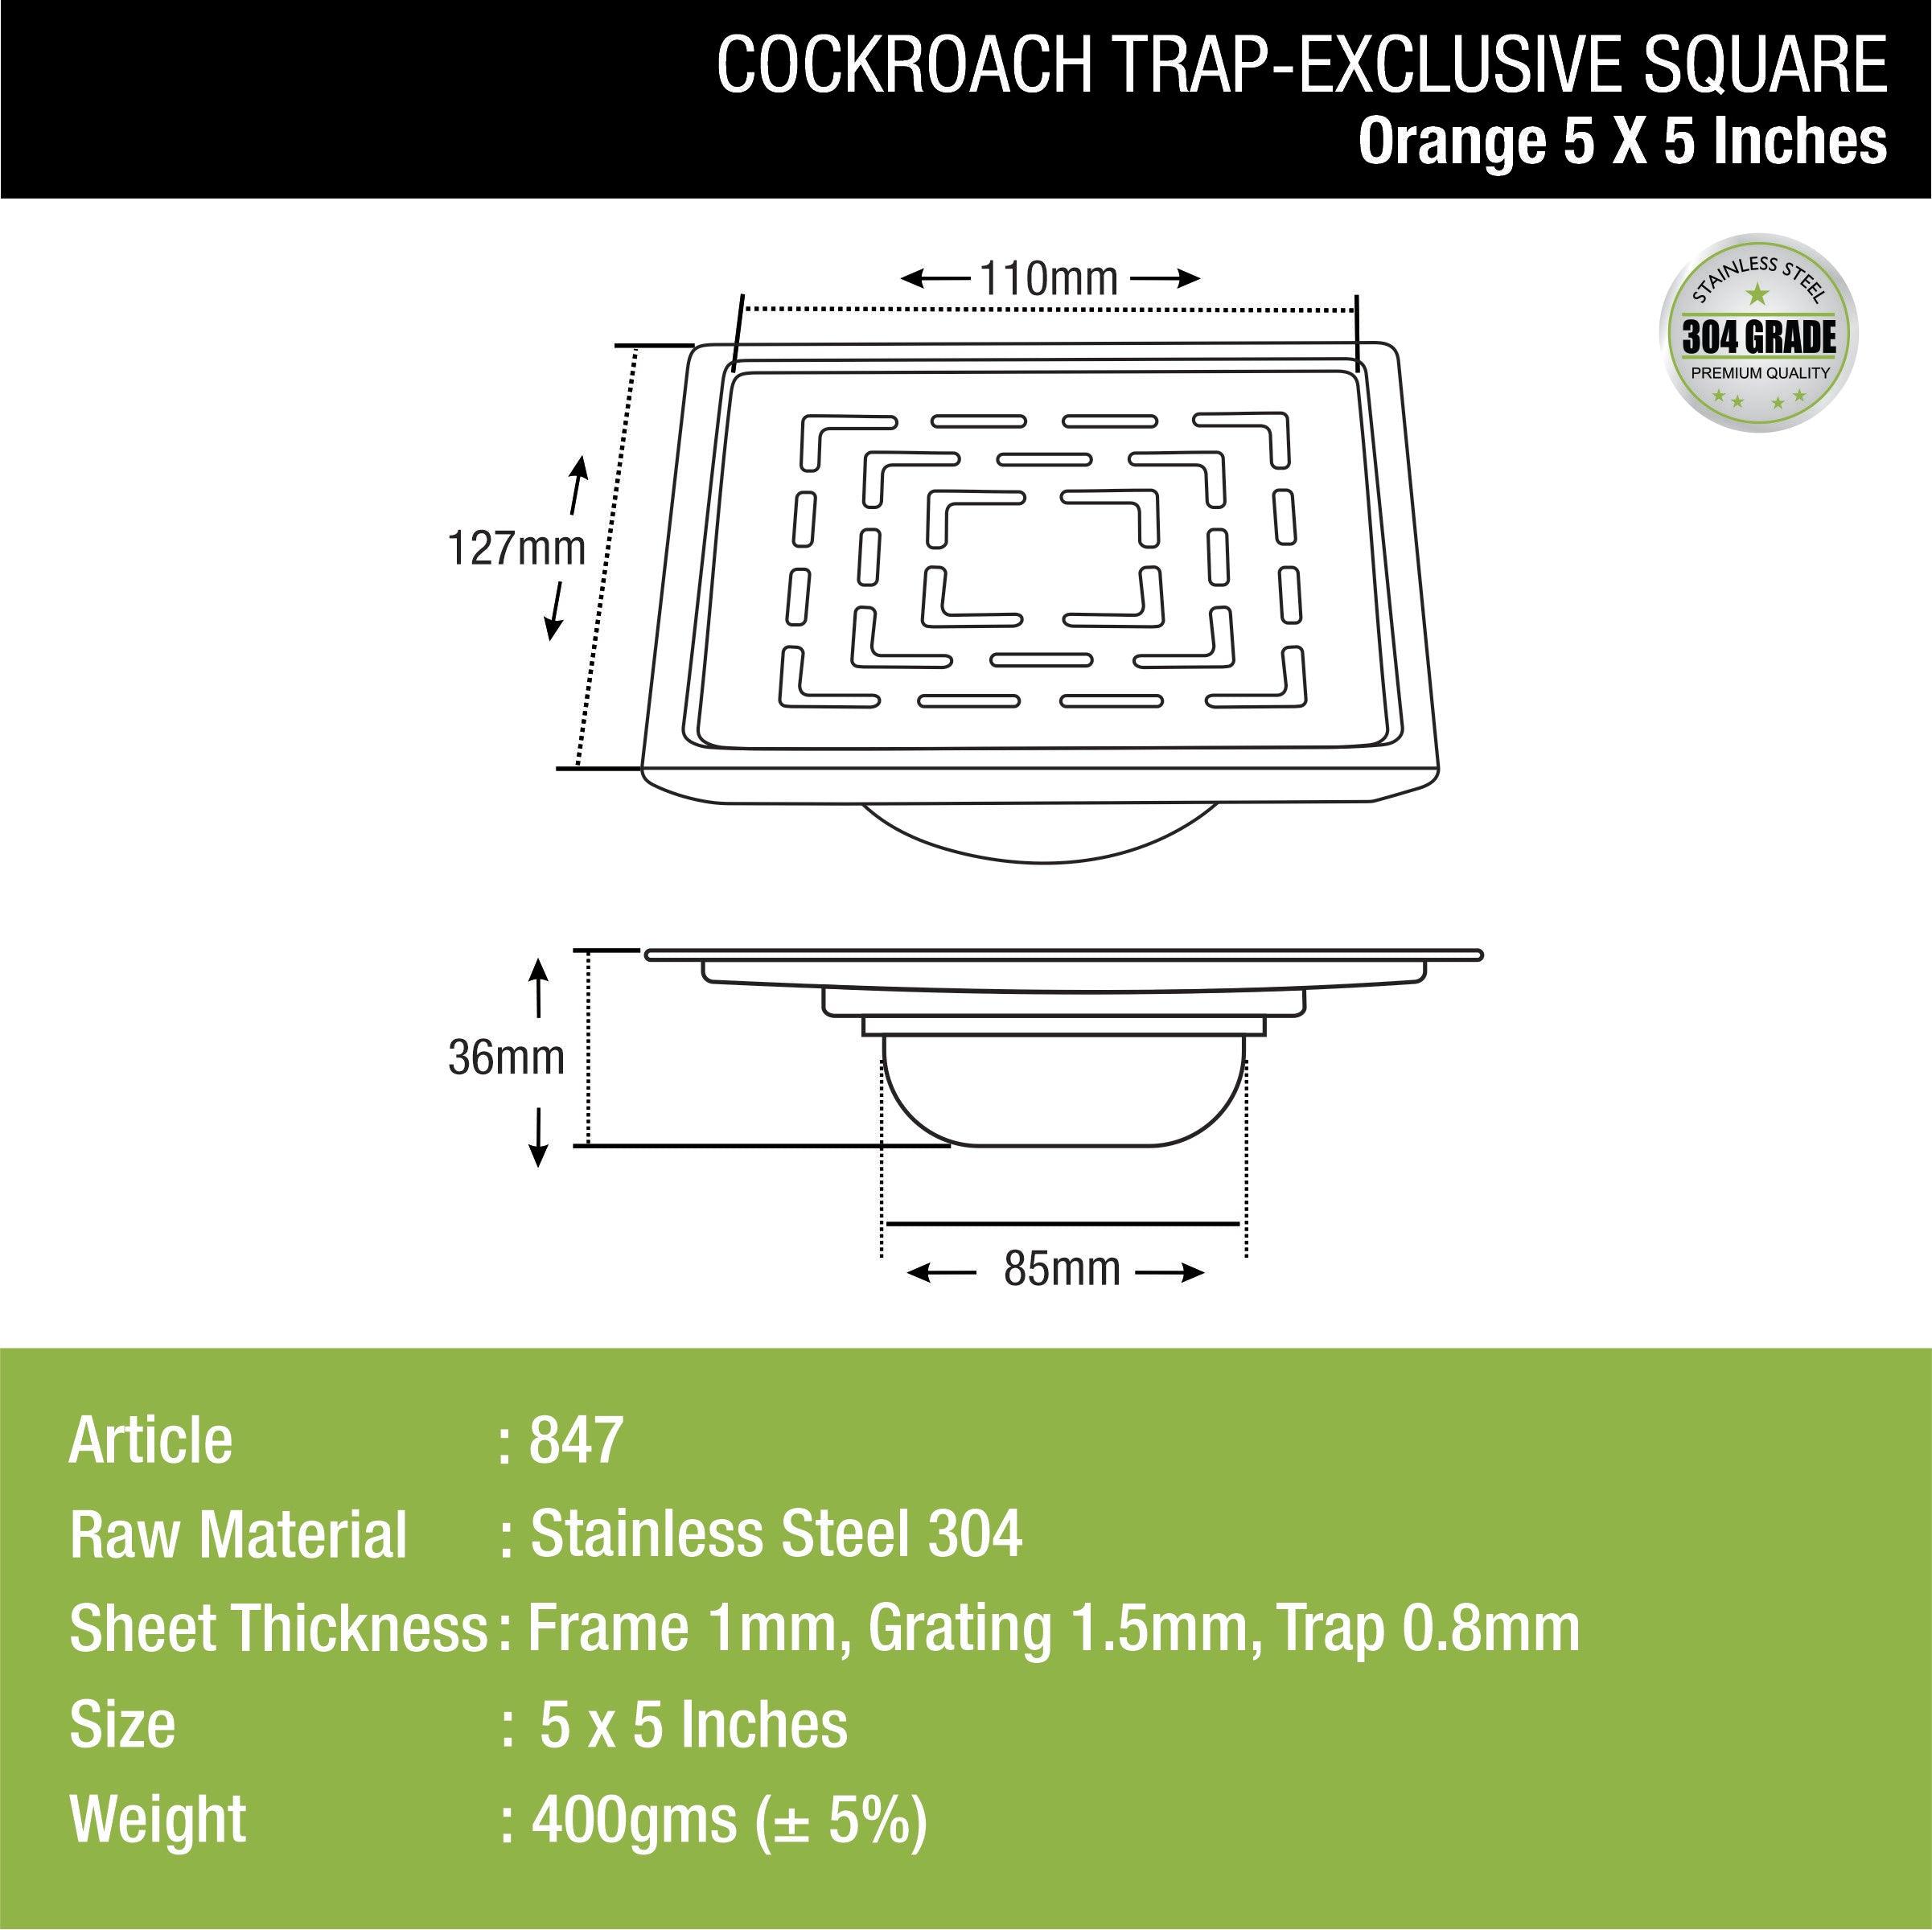 Orange Exclusive Square Floor Drain (5 x 5 Inches) with Cockroach Trap dimensions and size